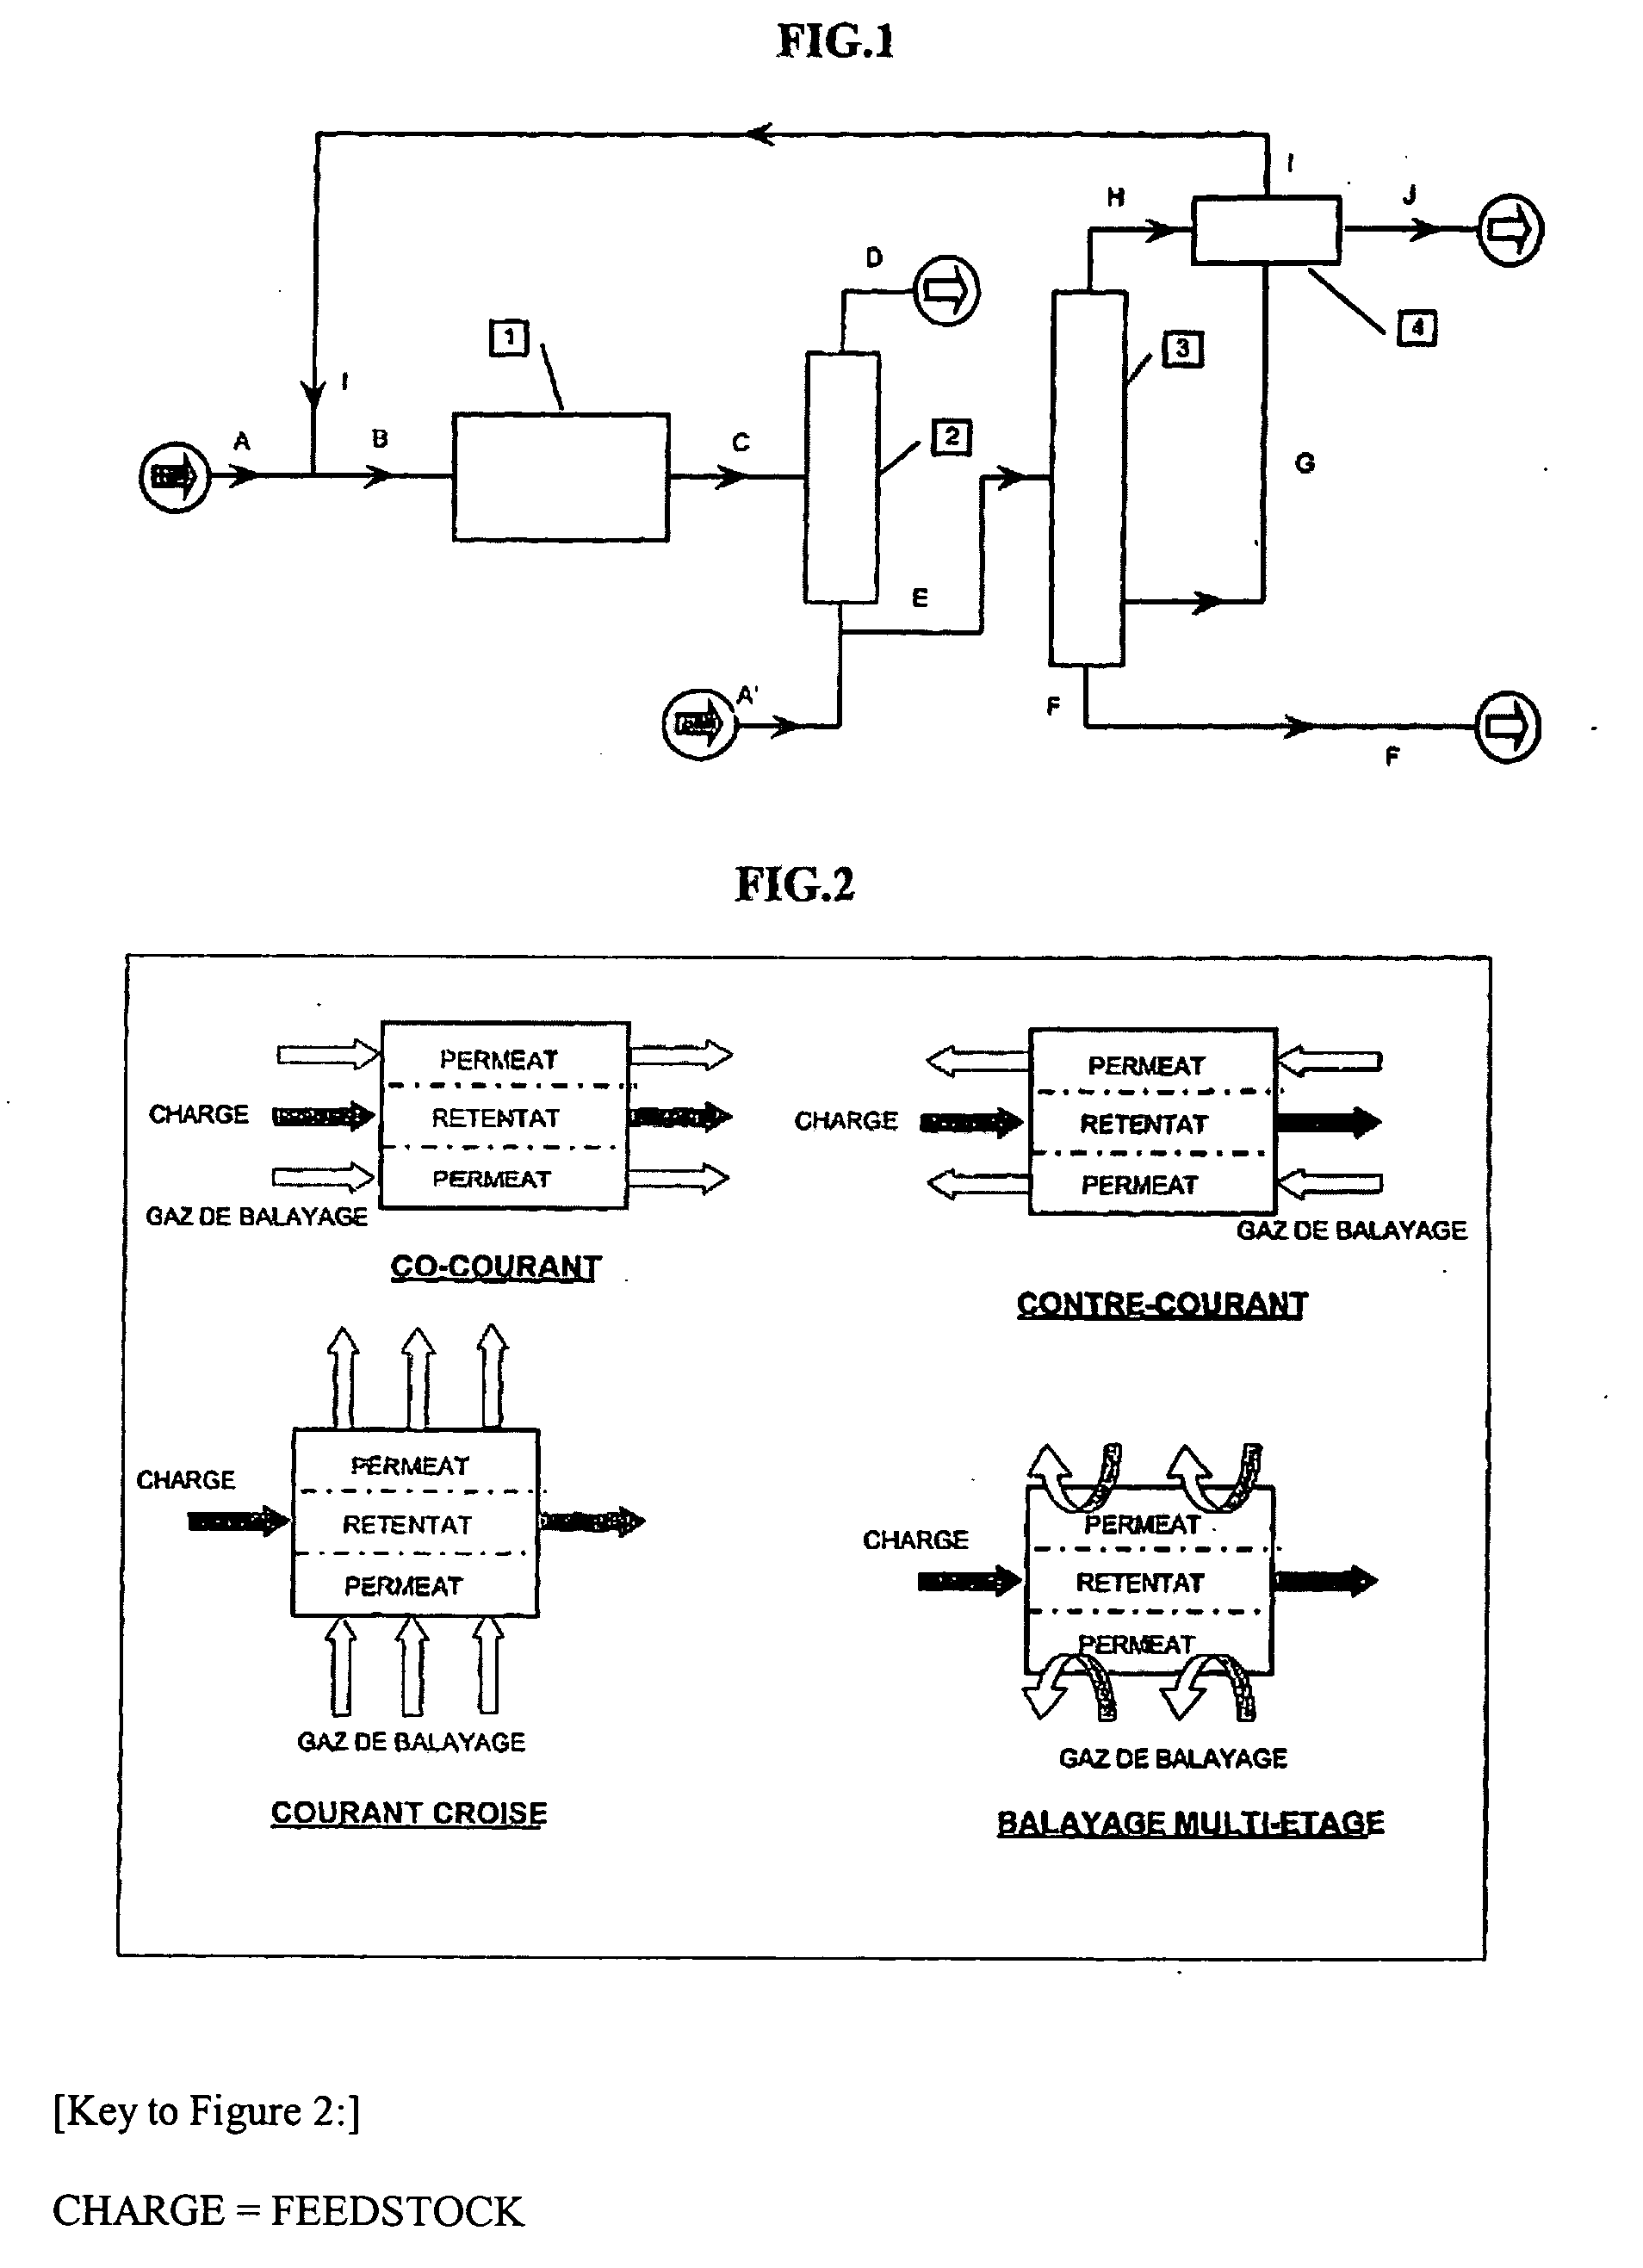 Method For Producing A High-Octane Gasoline From A C5/C6 Fraction By Means Of A Membrane Separation Unit